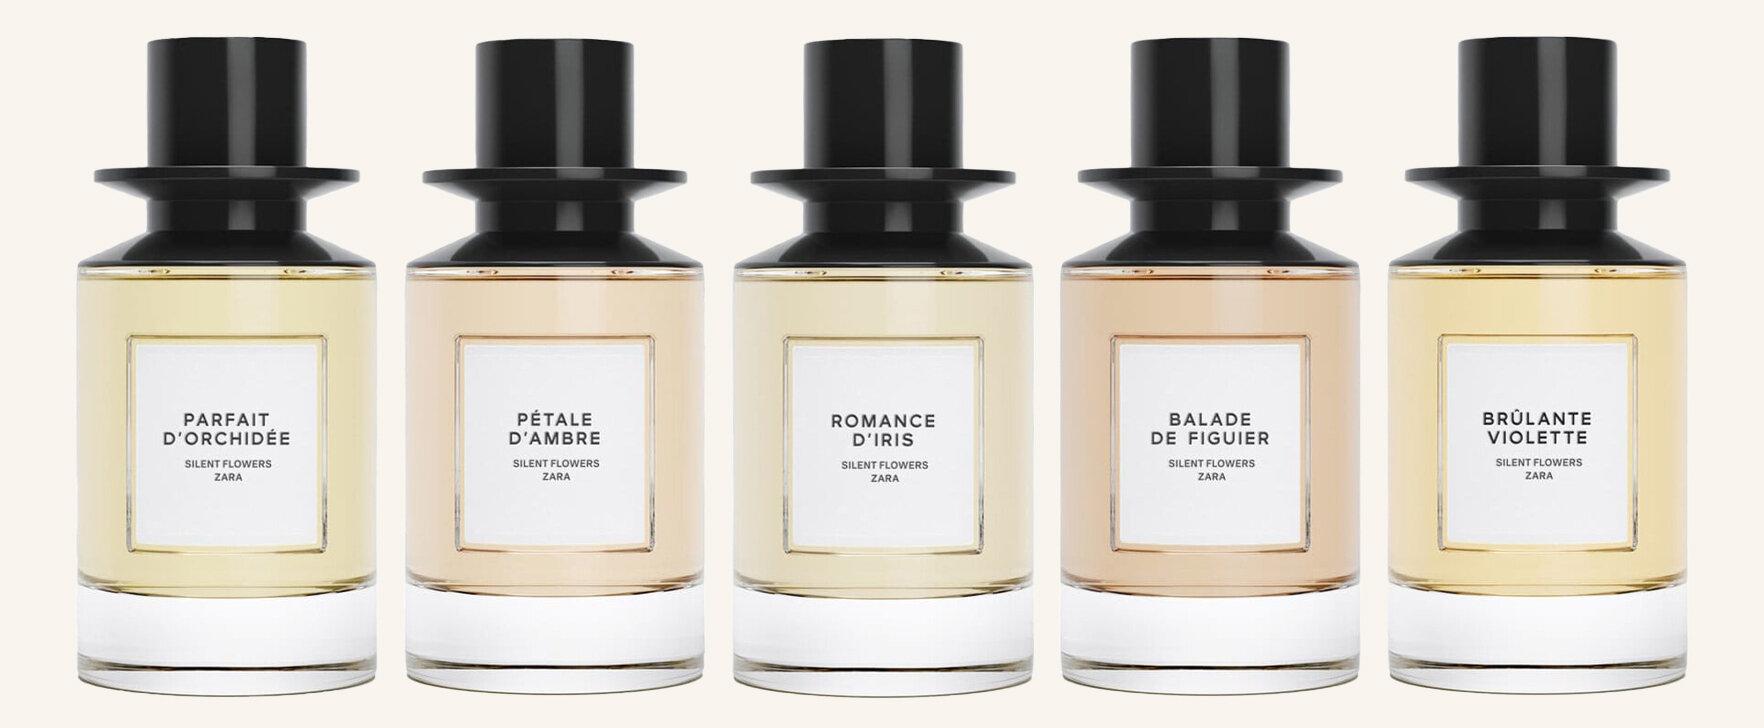 The New "Silent Flowers" Collection From Zara: A Scented Journey Through the World of Flowers